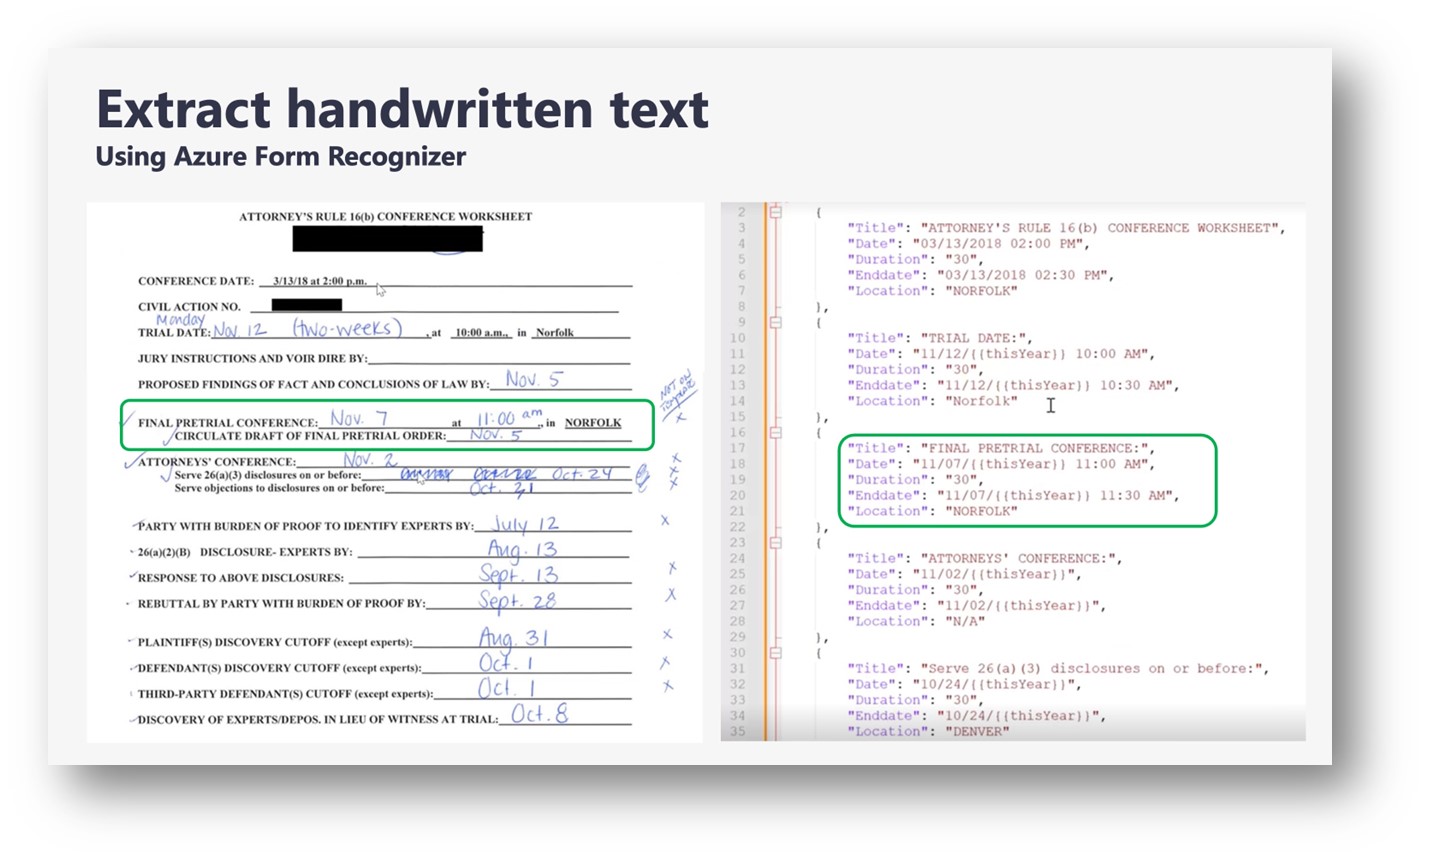 A screenshot shows handwritten answers in a legal form on the left next to accompanying code to help the app identify content and dates on the right. The text at the top reads, “Extract handwritten text using Azure Form Recognizer.”